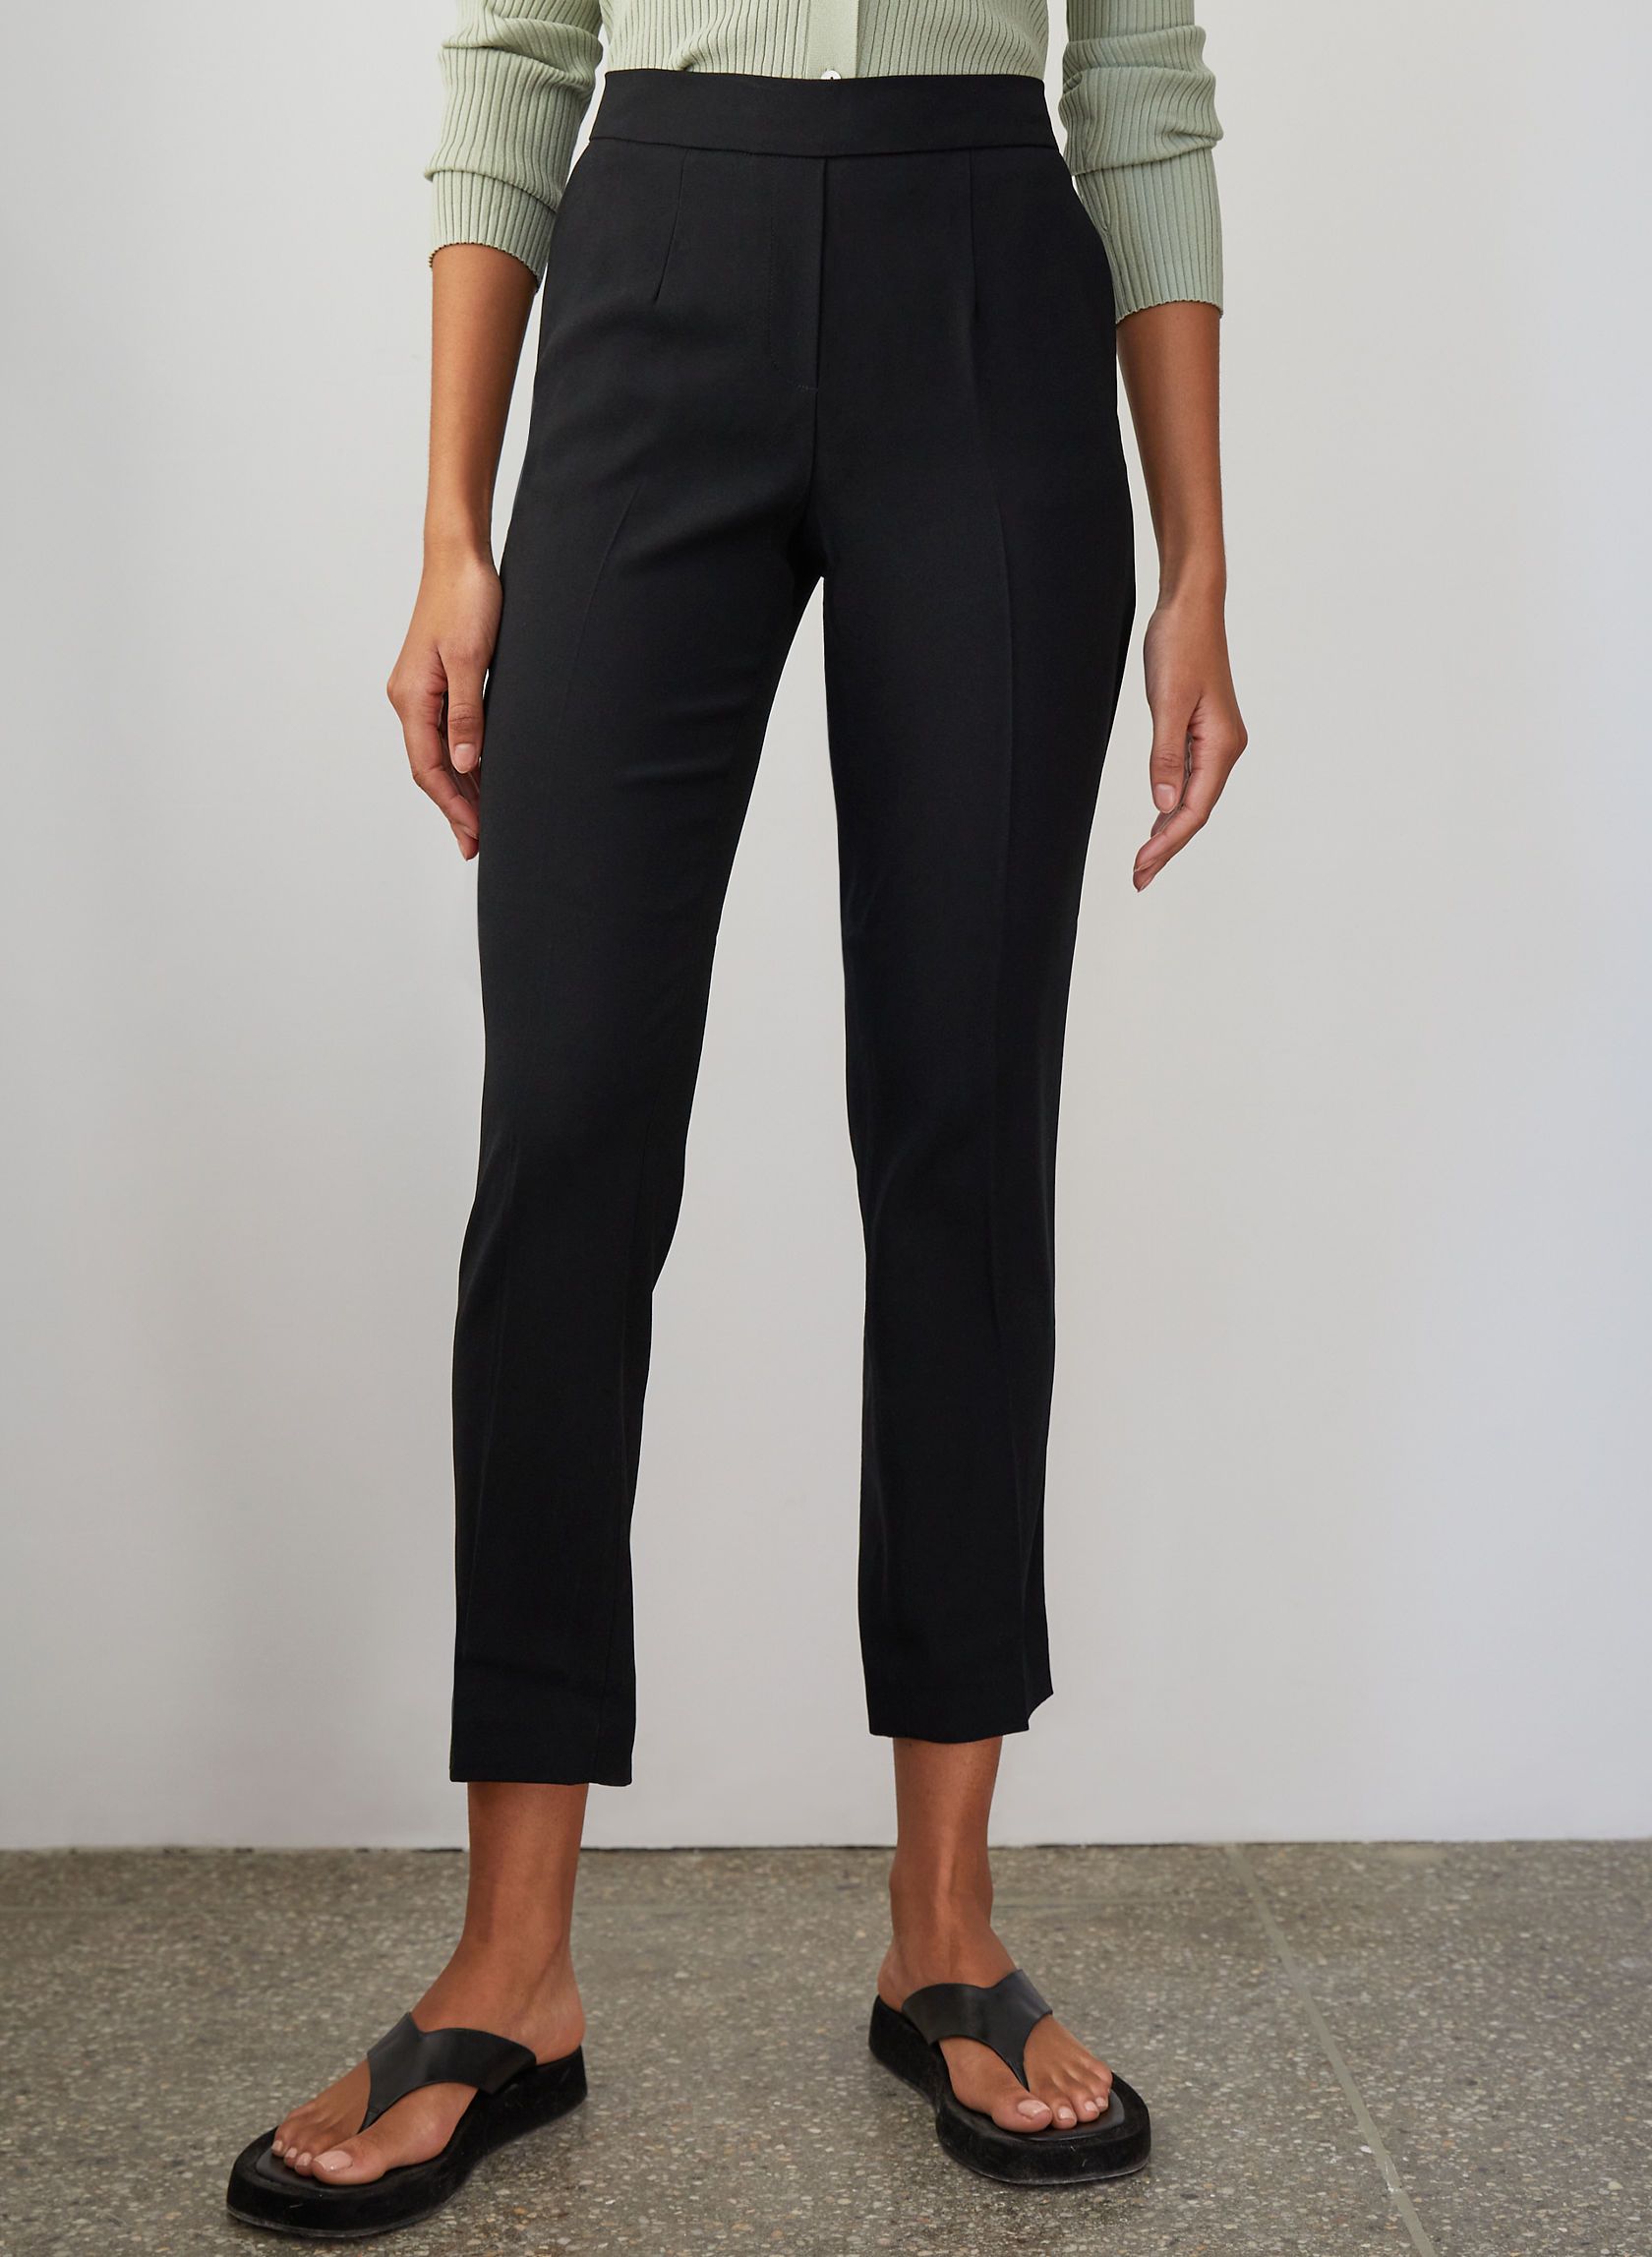 Women's Black Work Pants With Pockets on Women Guides